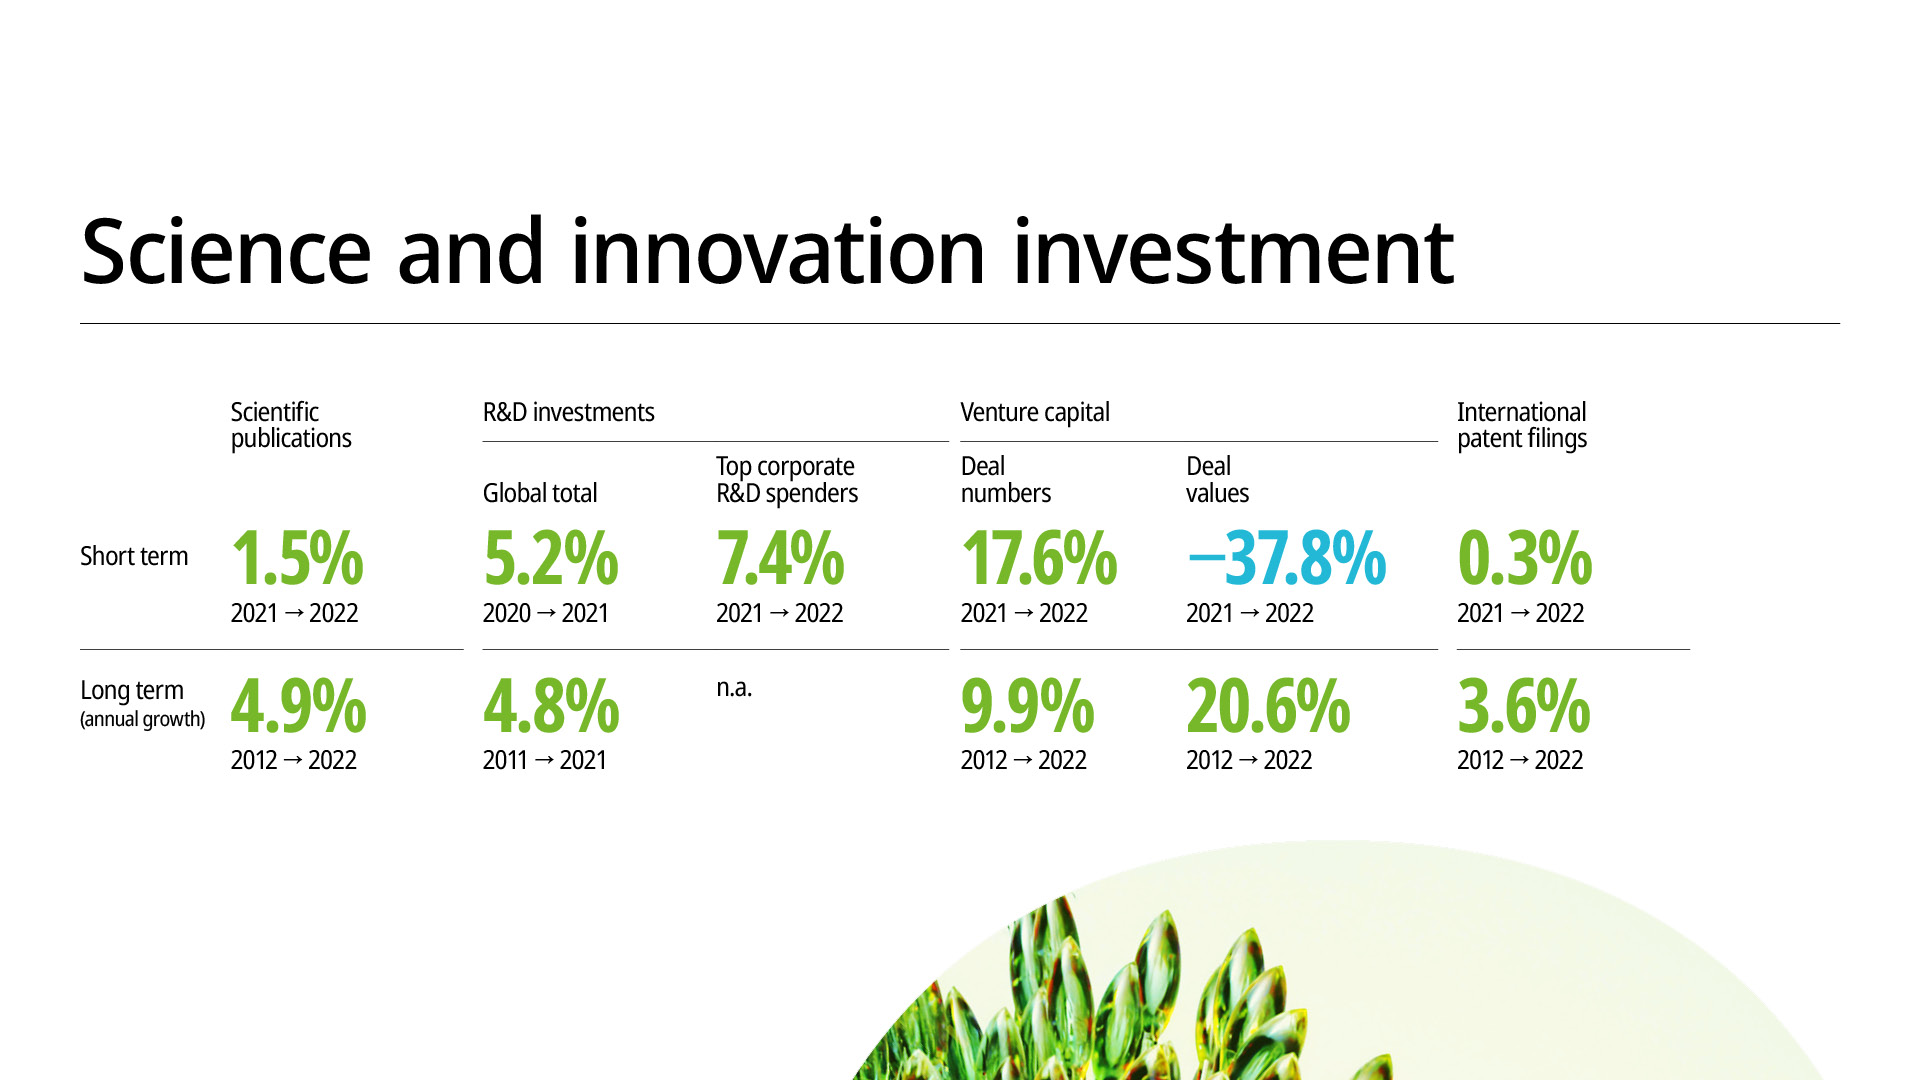 Science and innovation investments